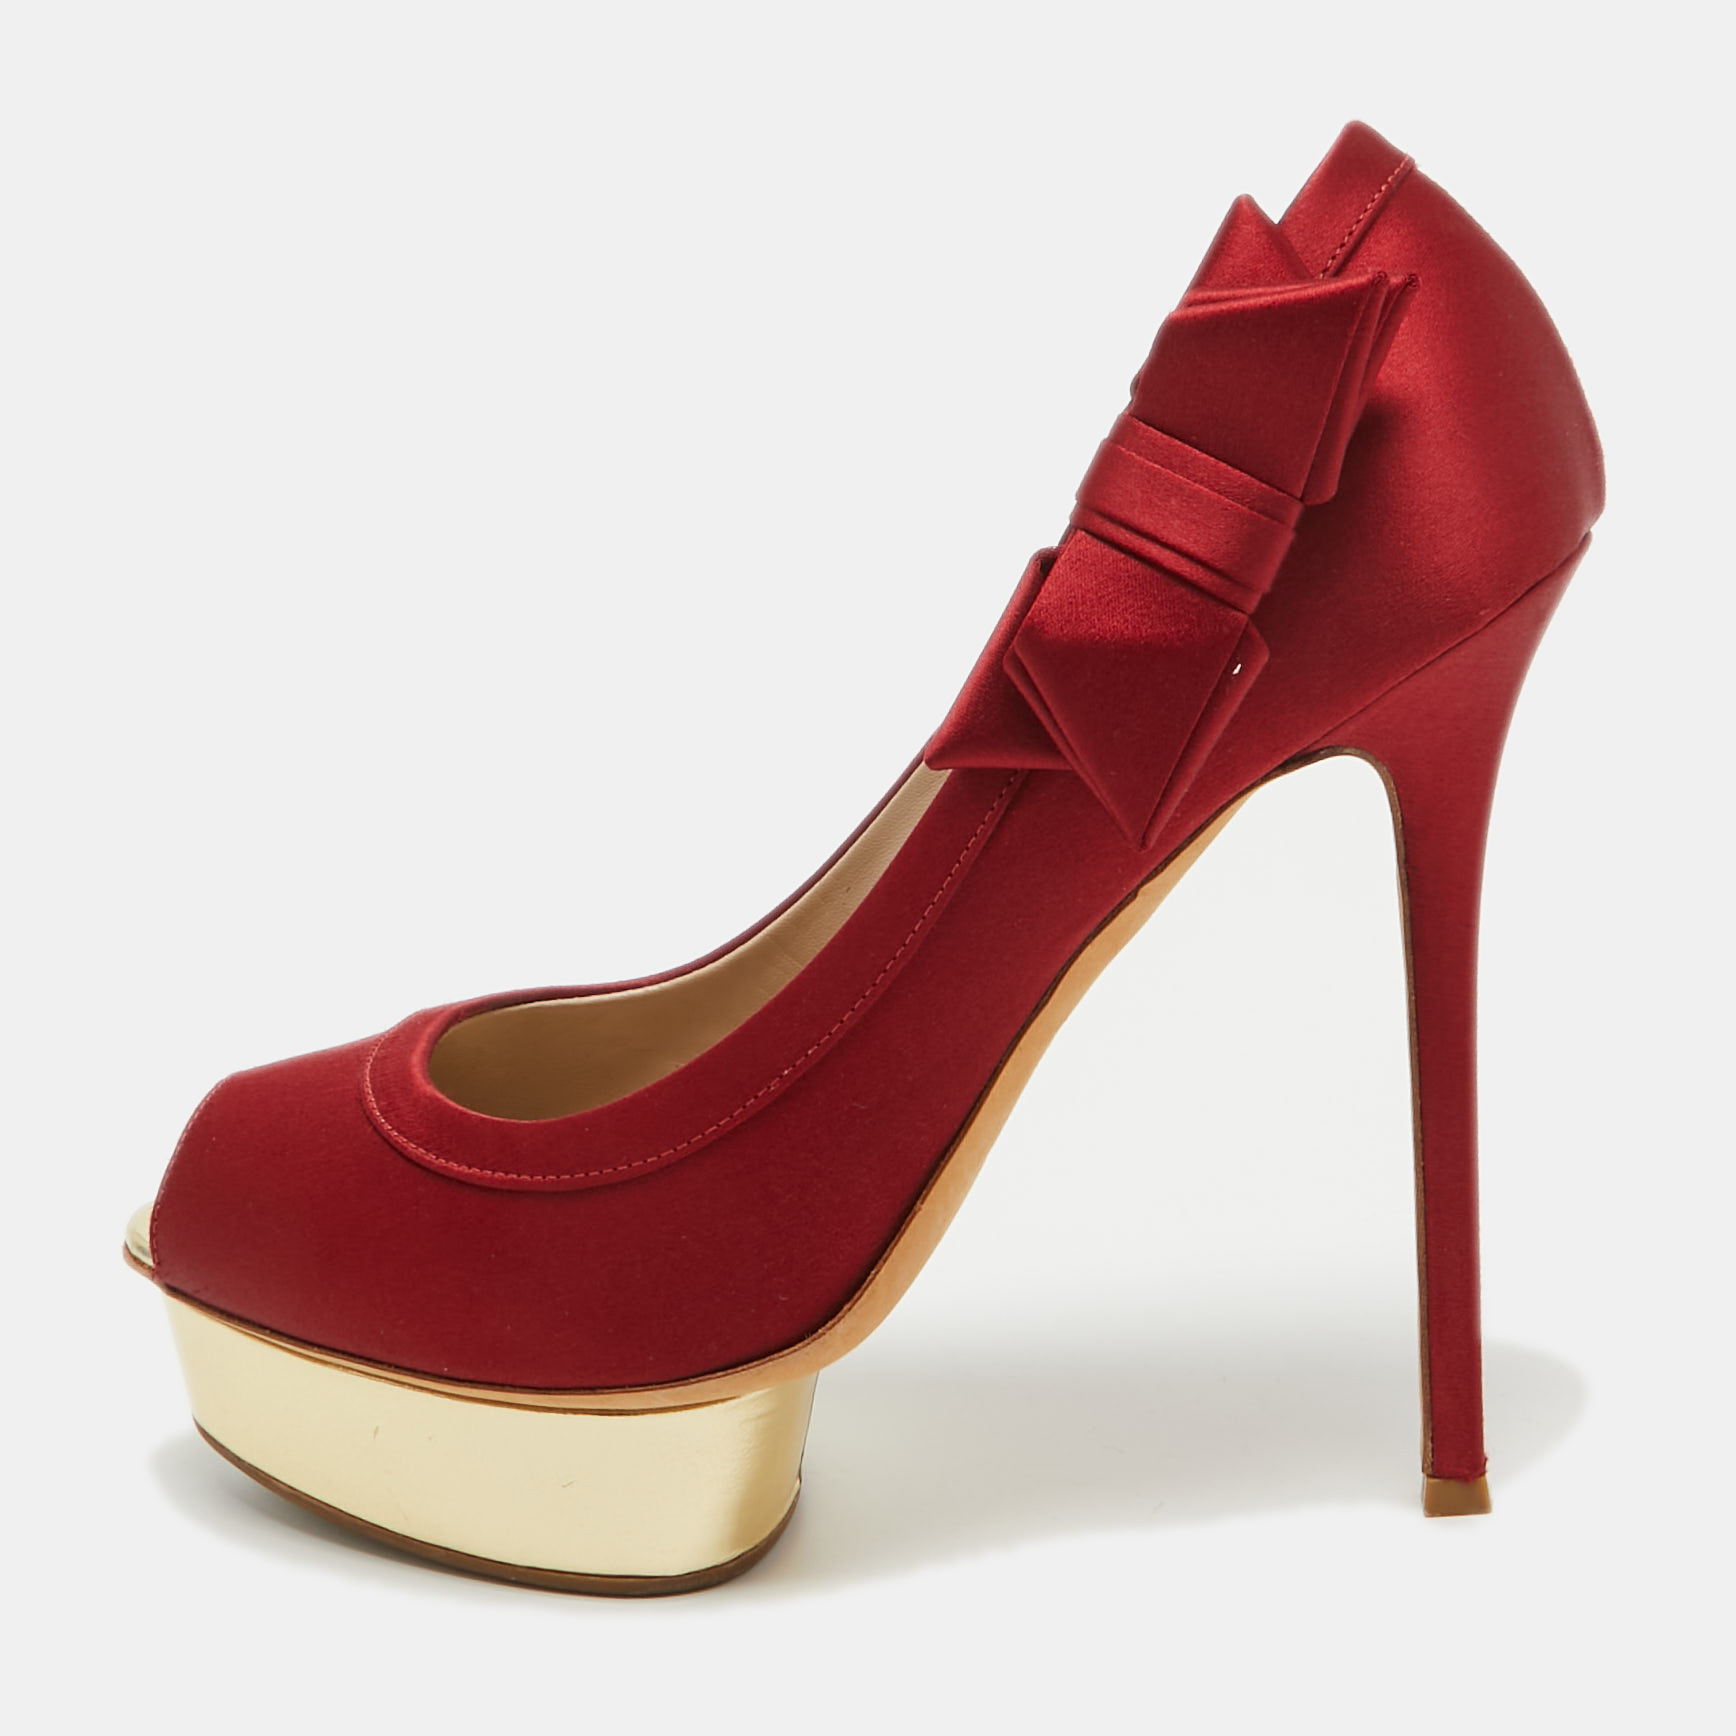 Pre-owned Le Silla Red Satin Peep Toe Platform Pumps Size 40.5